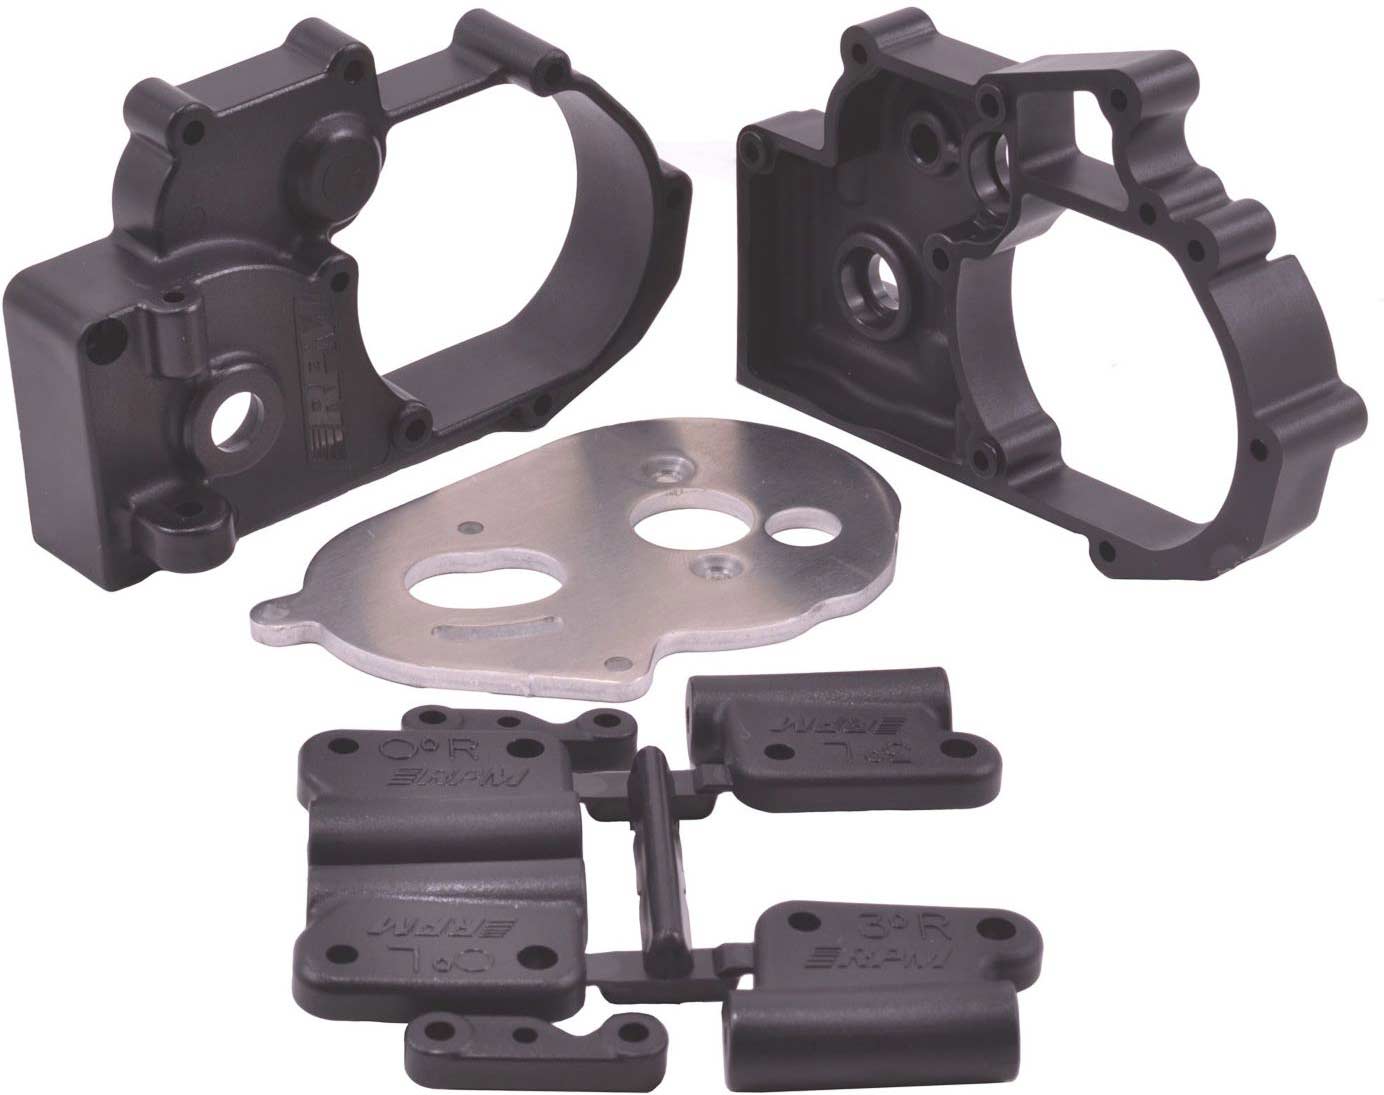 Gearbox Housing and Rear Mounts, Black: TRA 2WD Vehicles